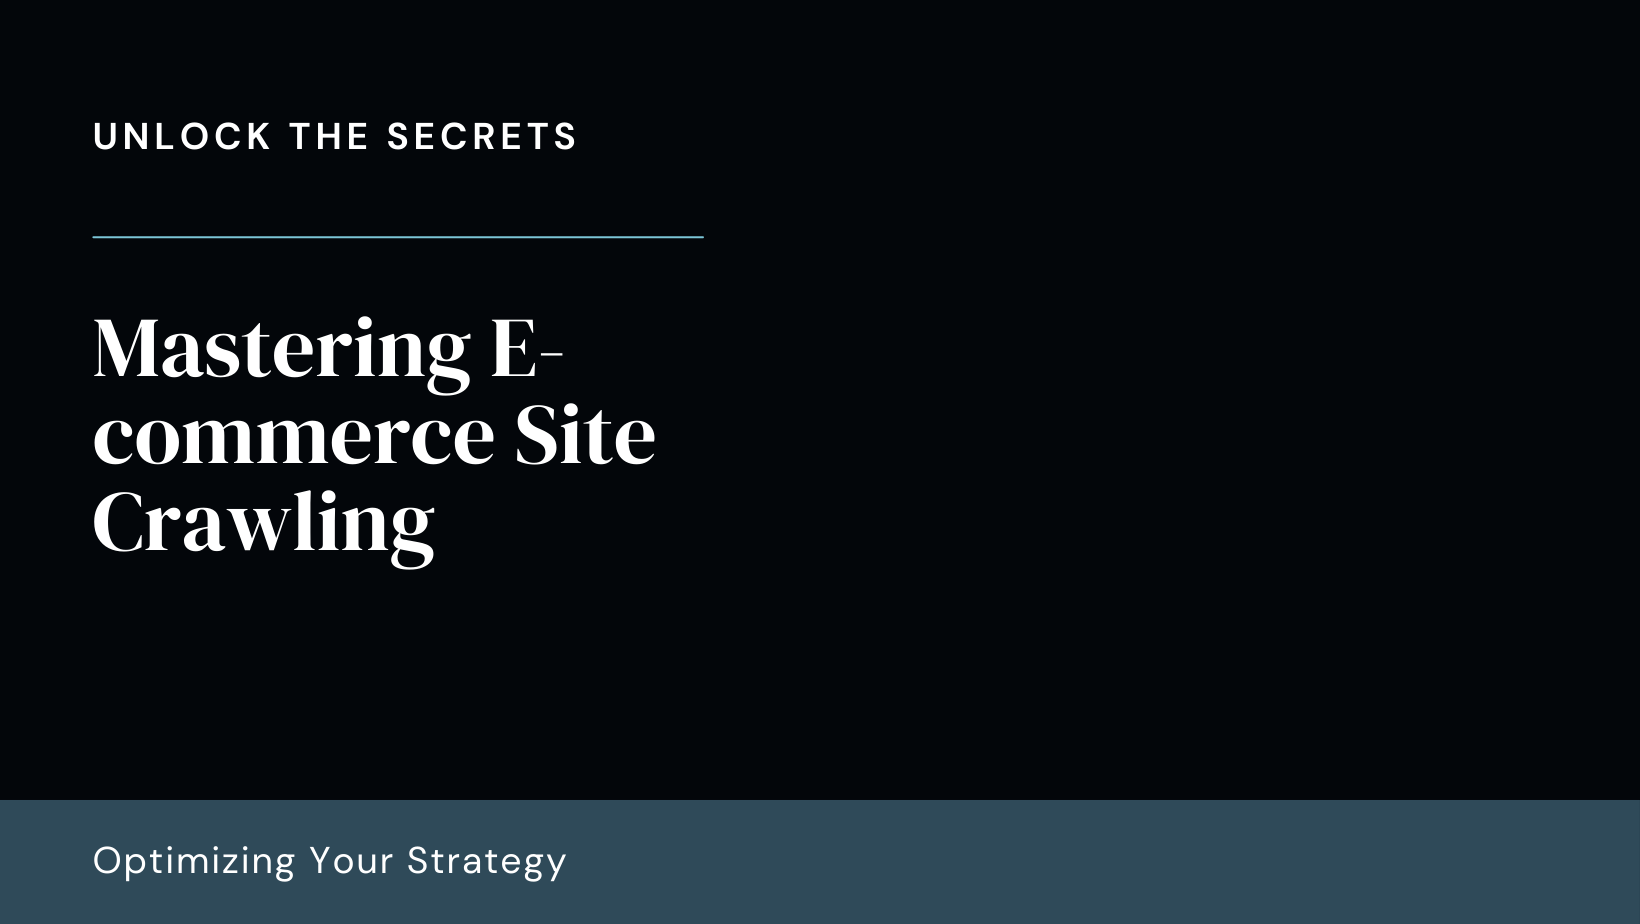 Mastering E-commerce Site Crawling from crawl feeds